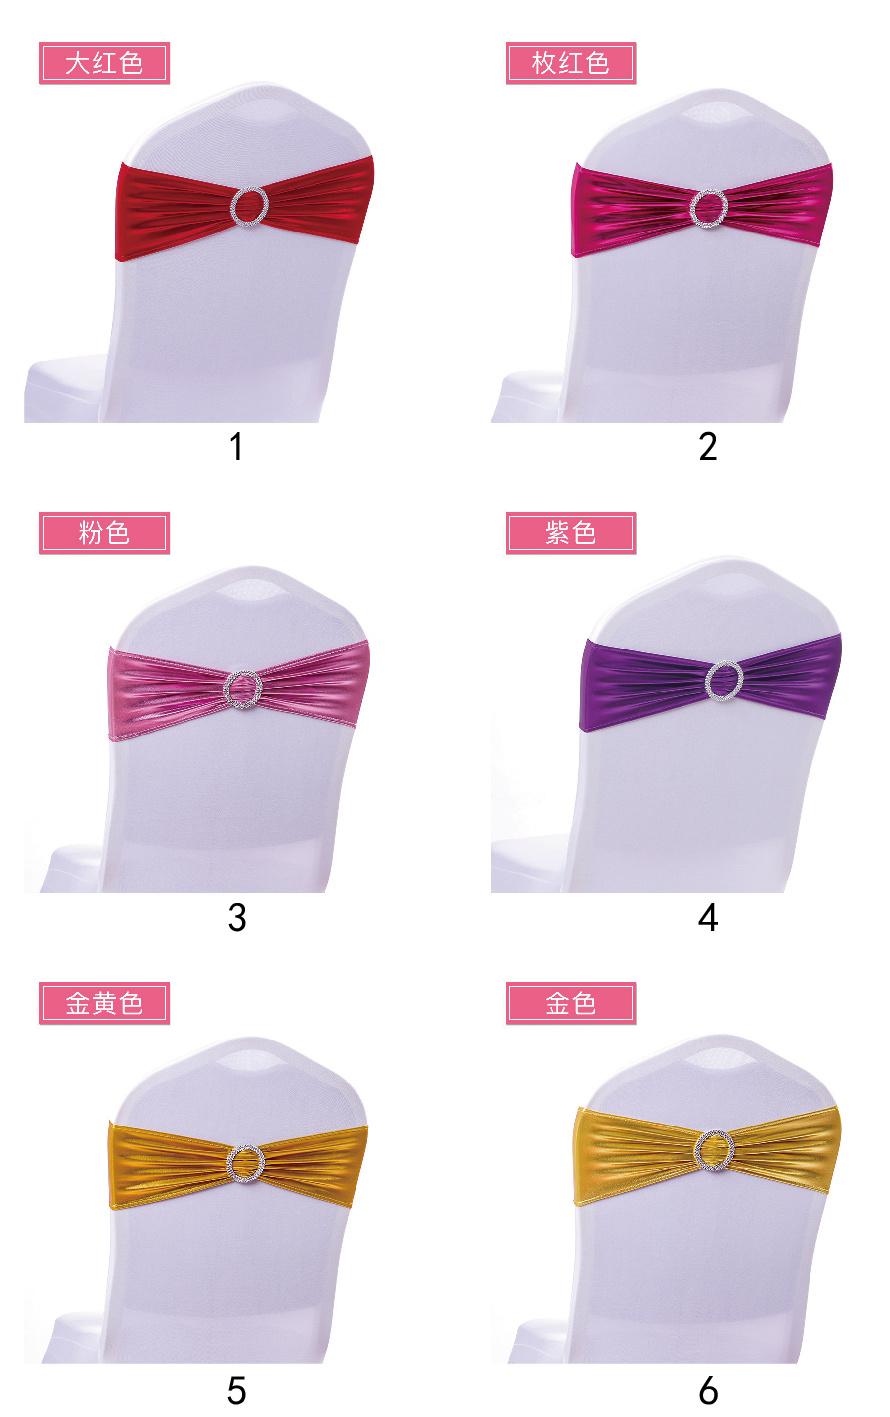 Decorational Metallic Spandex Sash with Buckle for Chair of Wedding and Banquet